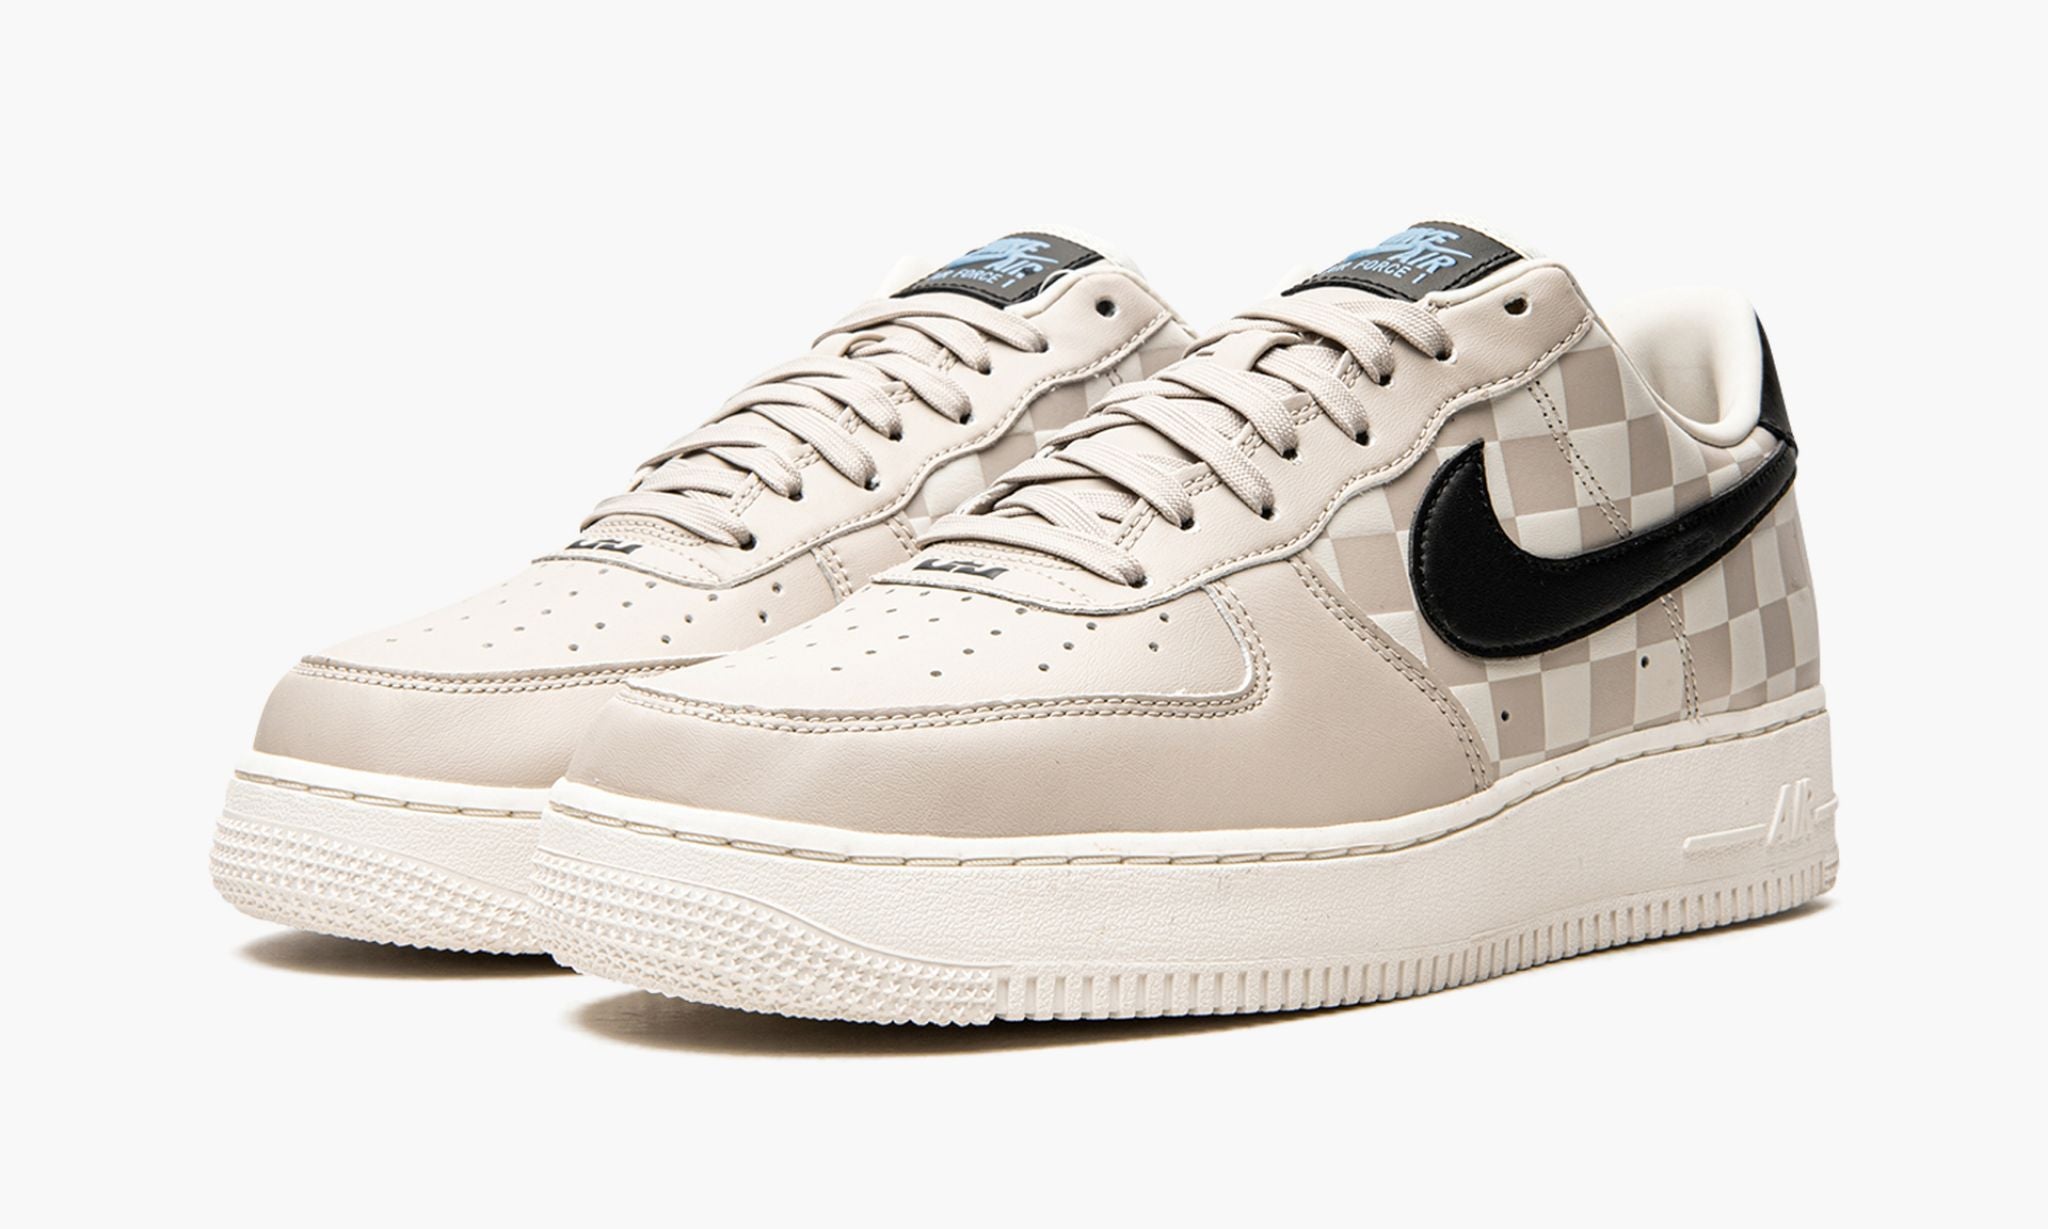 Nike Air Force 1 LOW Strive For Greatness